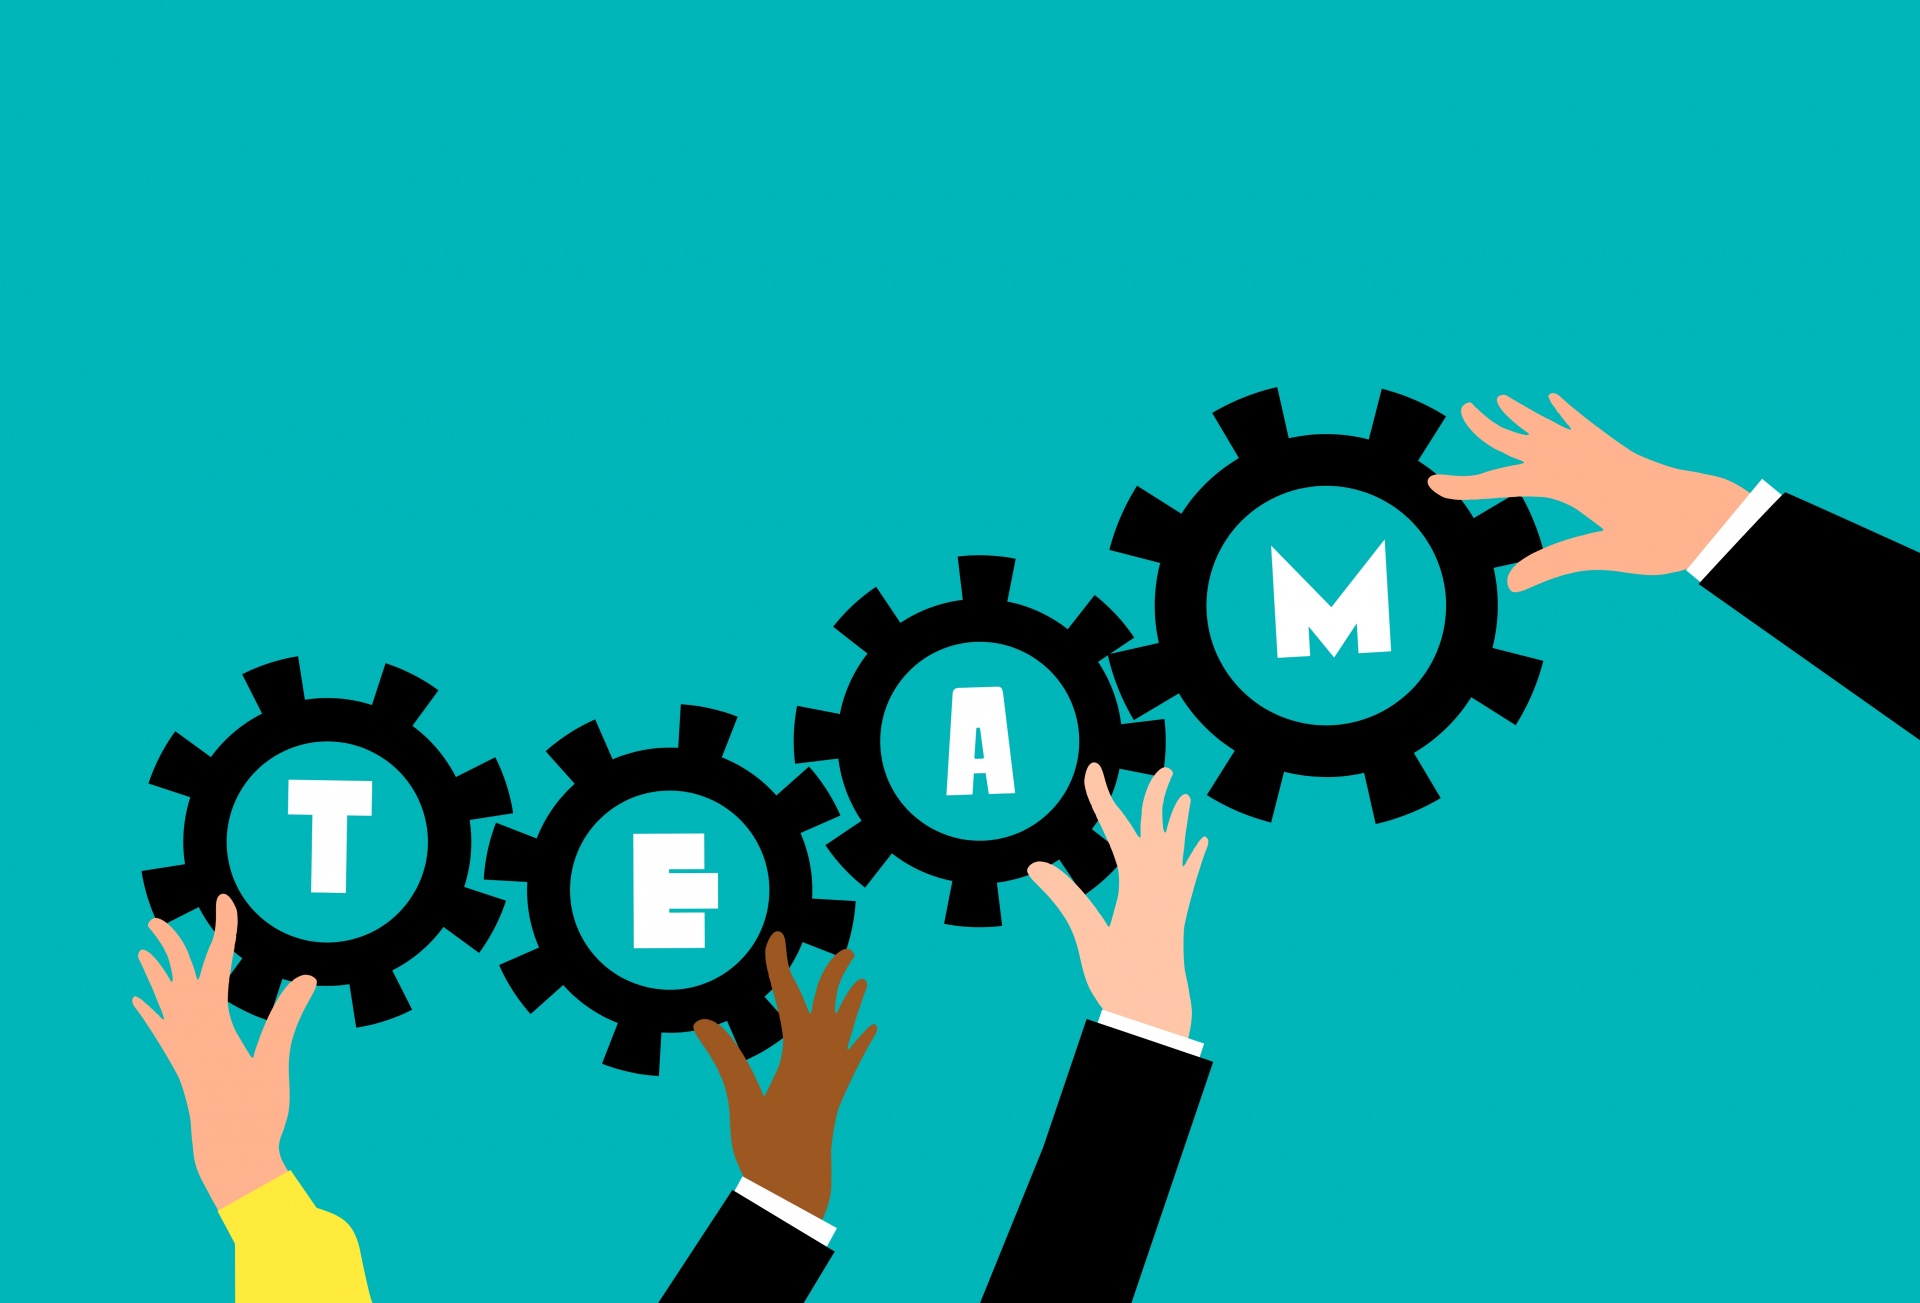 business, teamwork, cooperation, team, organization, unity, gears, people, company, cogwheel, community, partnership, work, social, cog, worker, businessman, manager, connection, communication, wheel, human, leader, group, sign